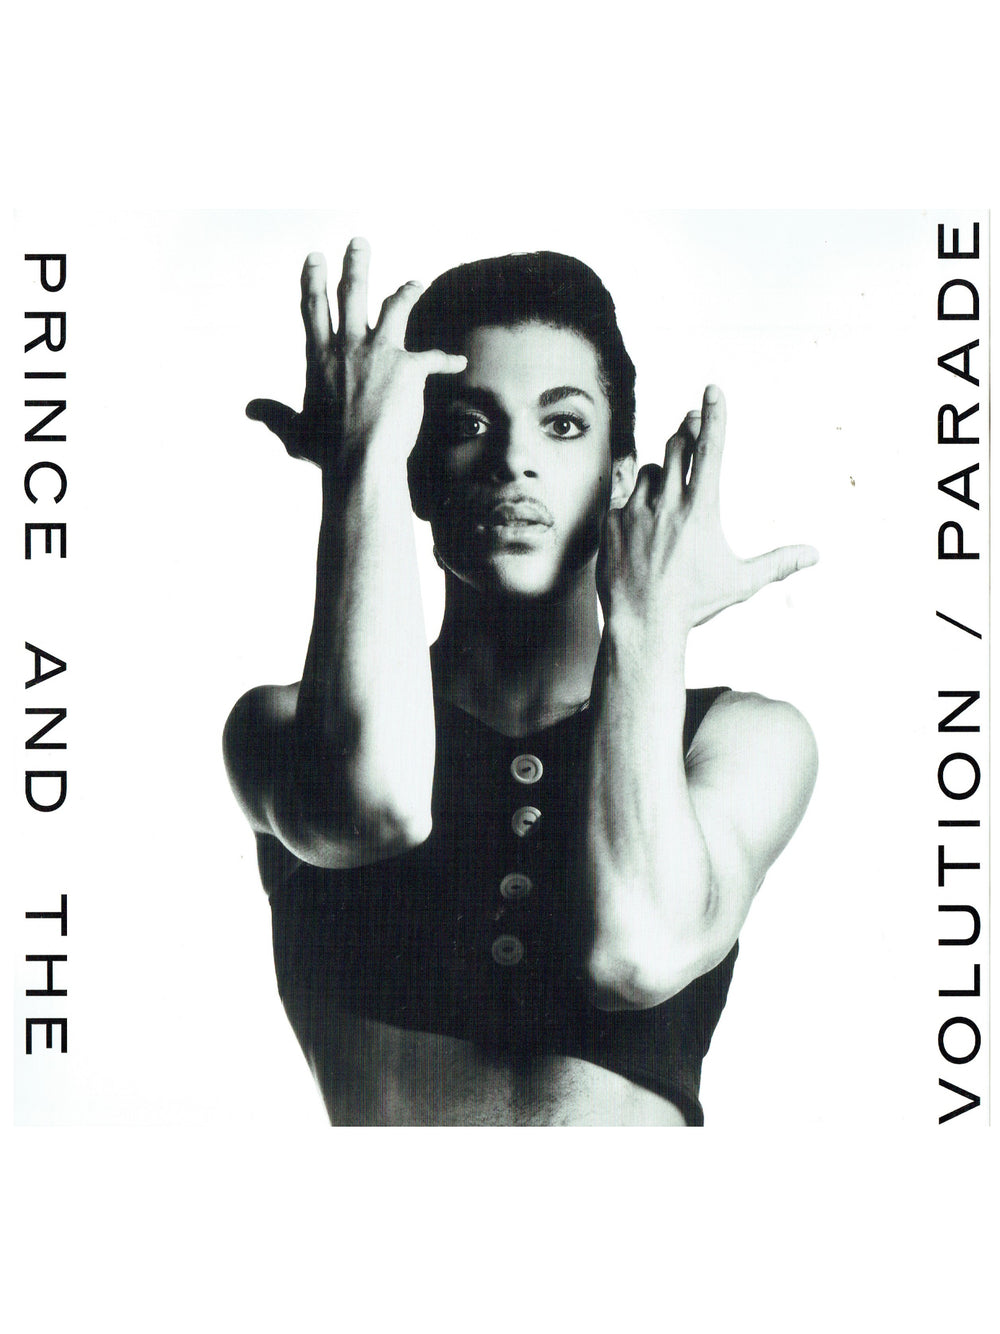 Prince – & The Revolution - Parade Music From The Motion Picture Under The Cherry Moon Vinyl LP Album GF US Preloved: 1986